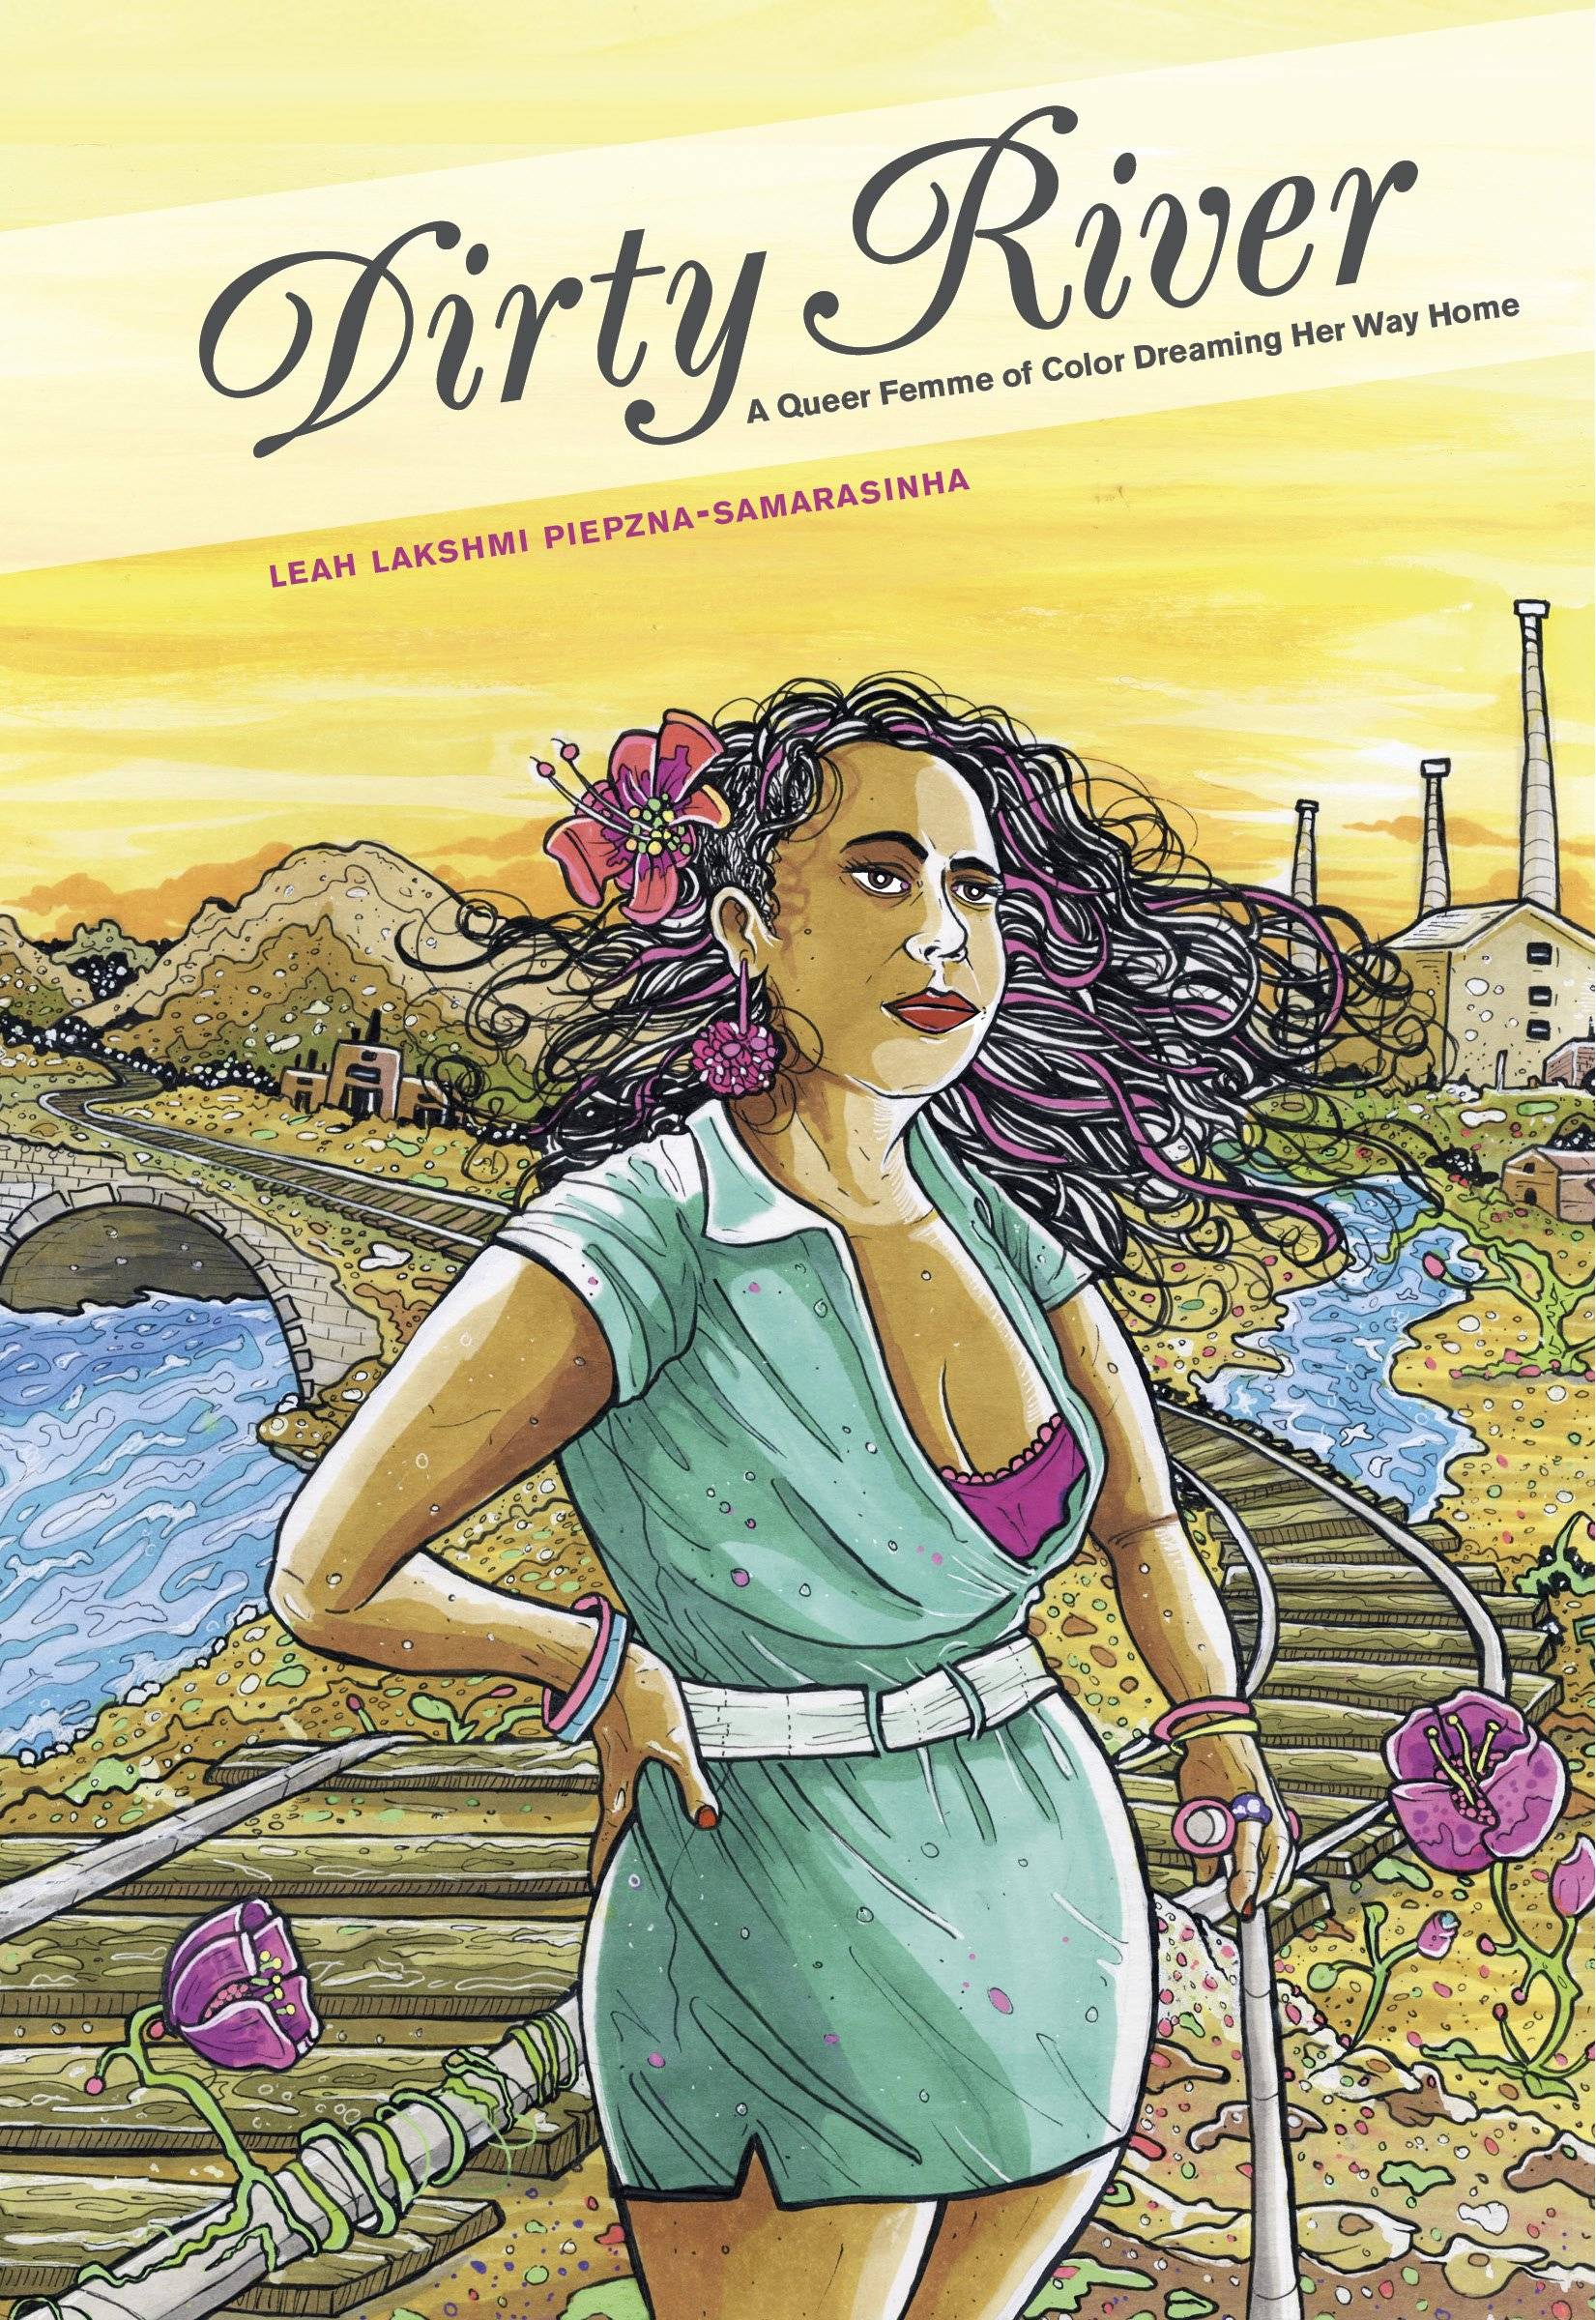 Illustrated "Dirty River" book cover featuring a figure along train tracks and a river utilizing a cane.